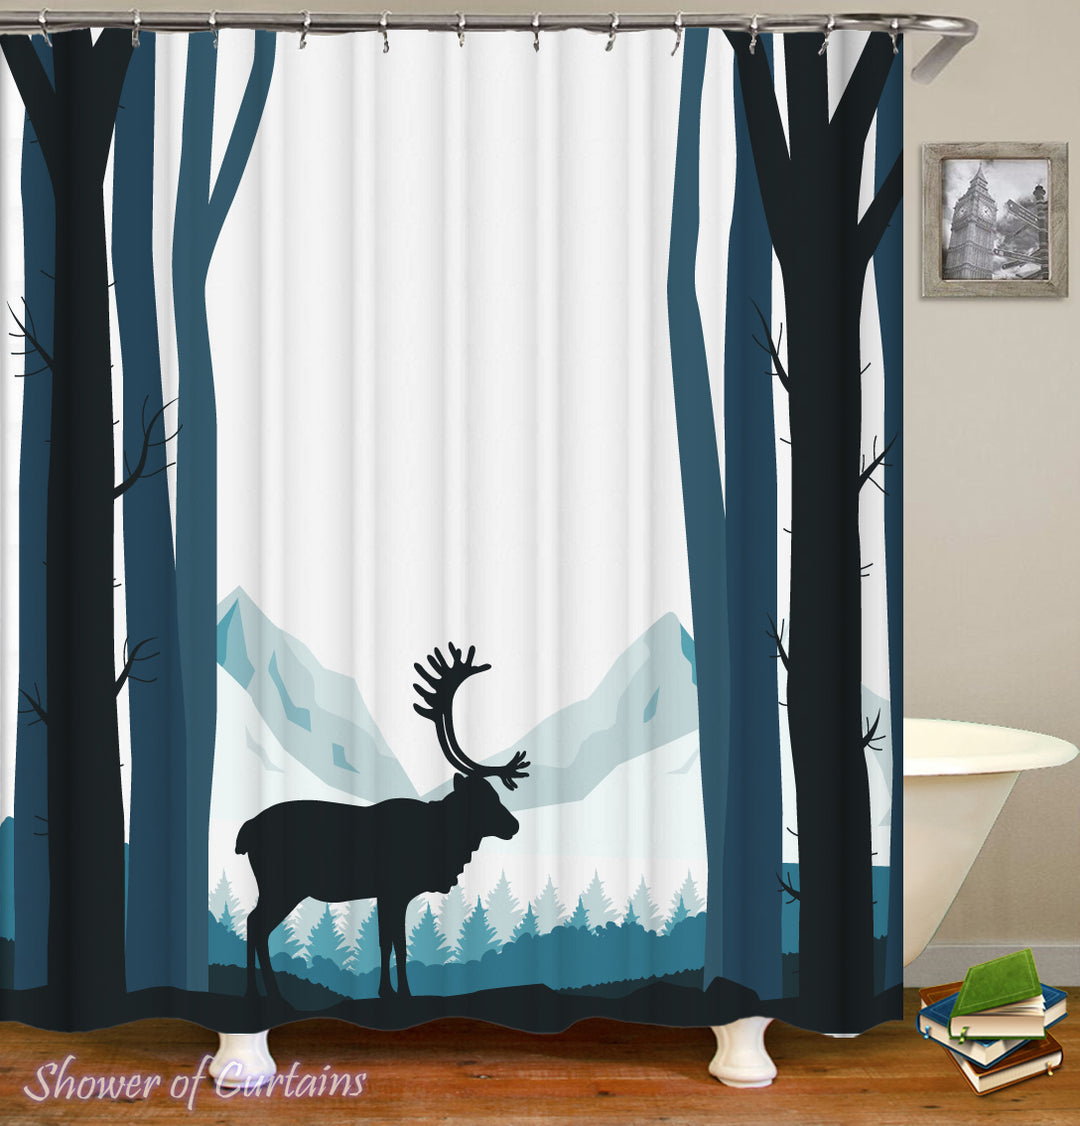 Hunters Shower Curtains - Reindeer Silhouette Shower Curtain